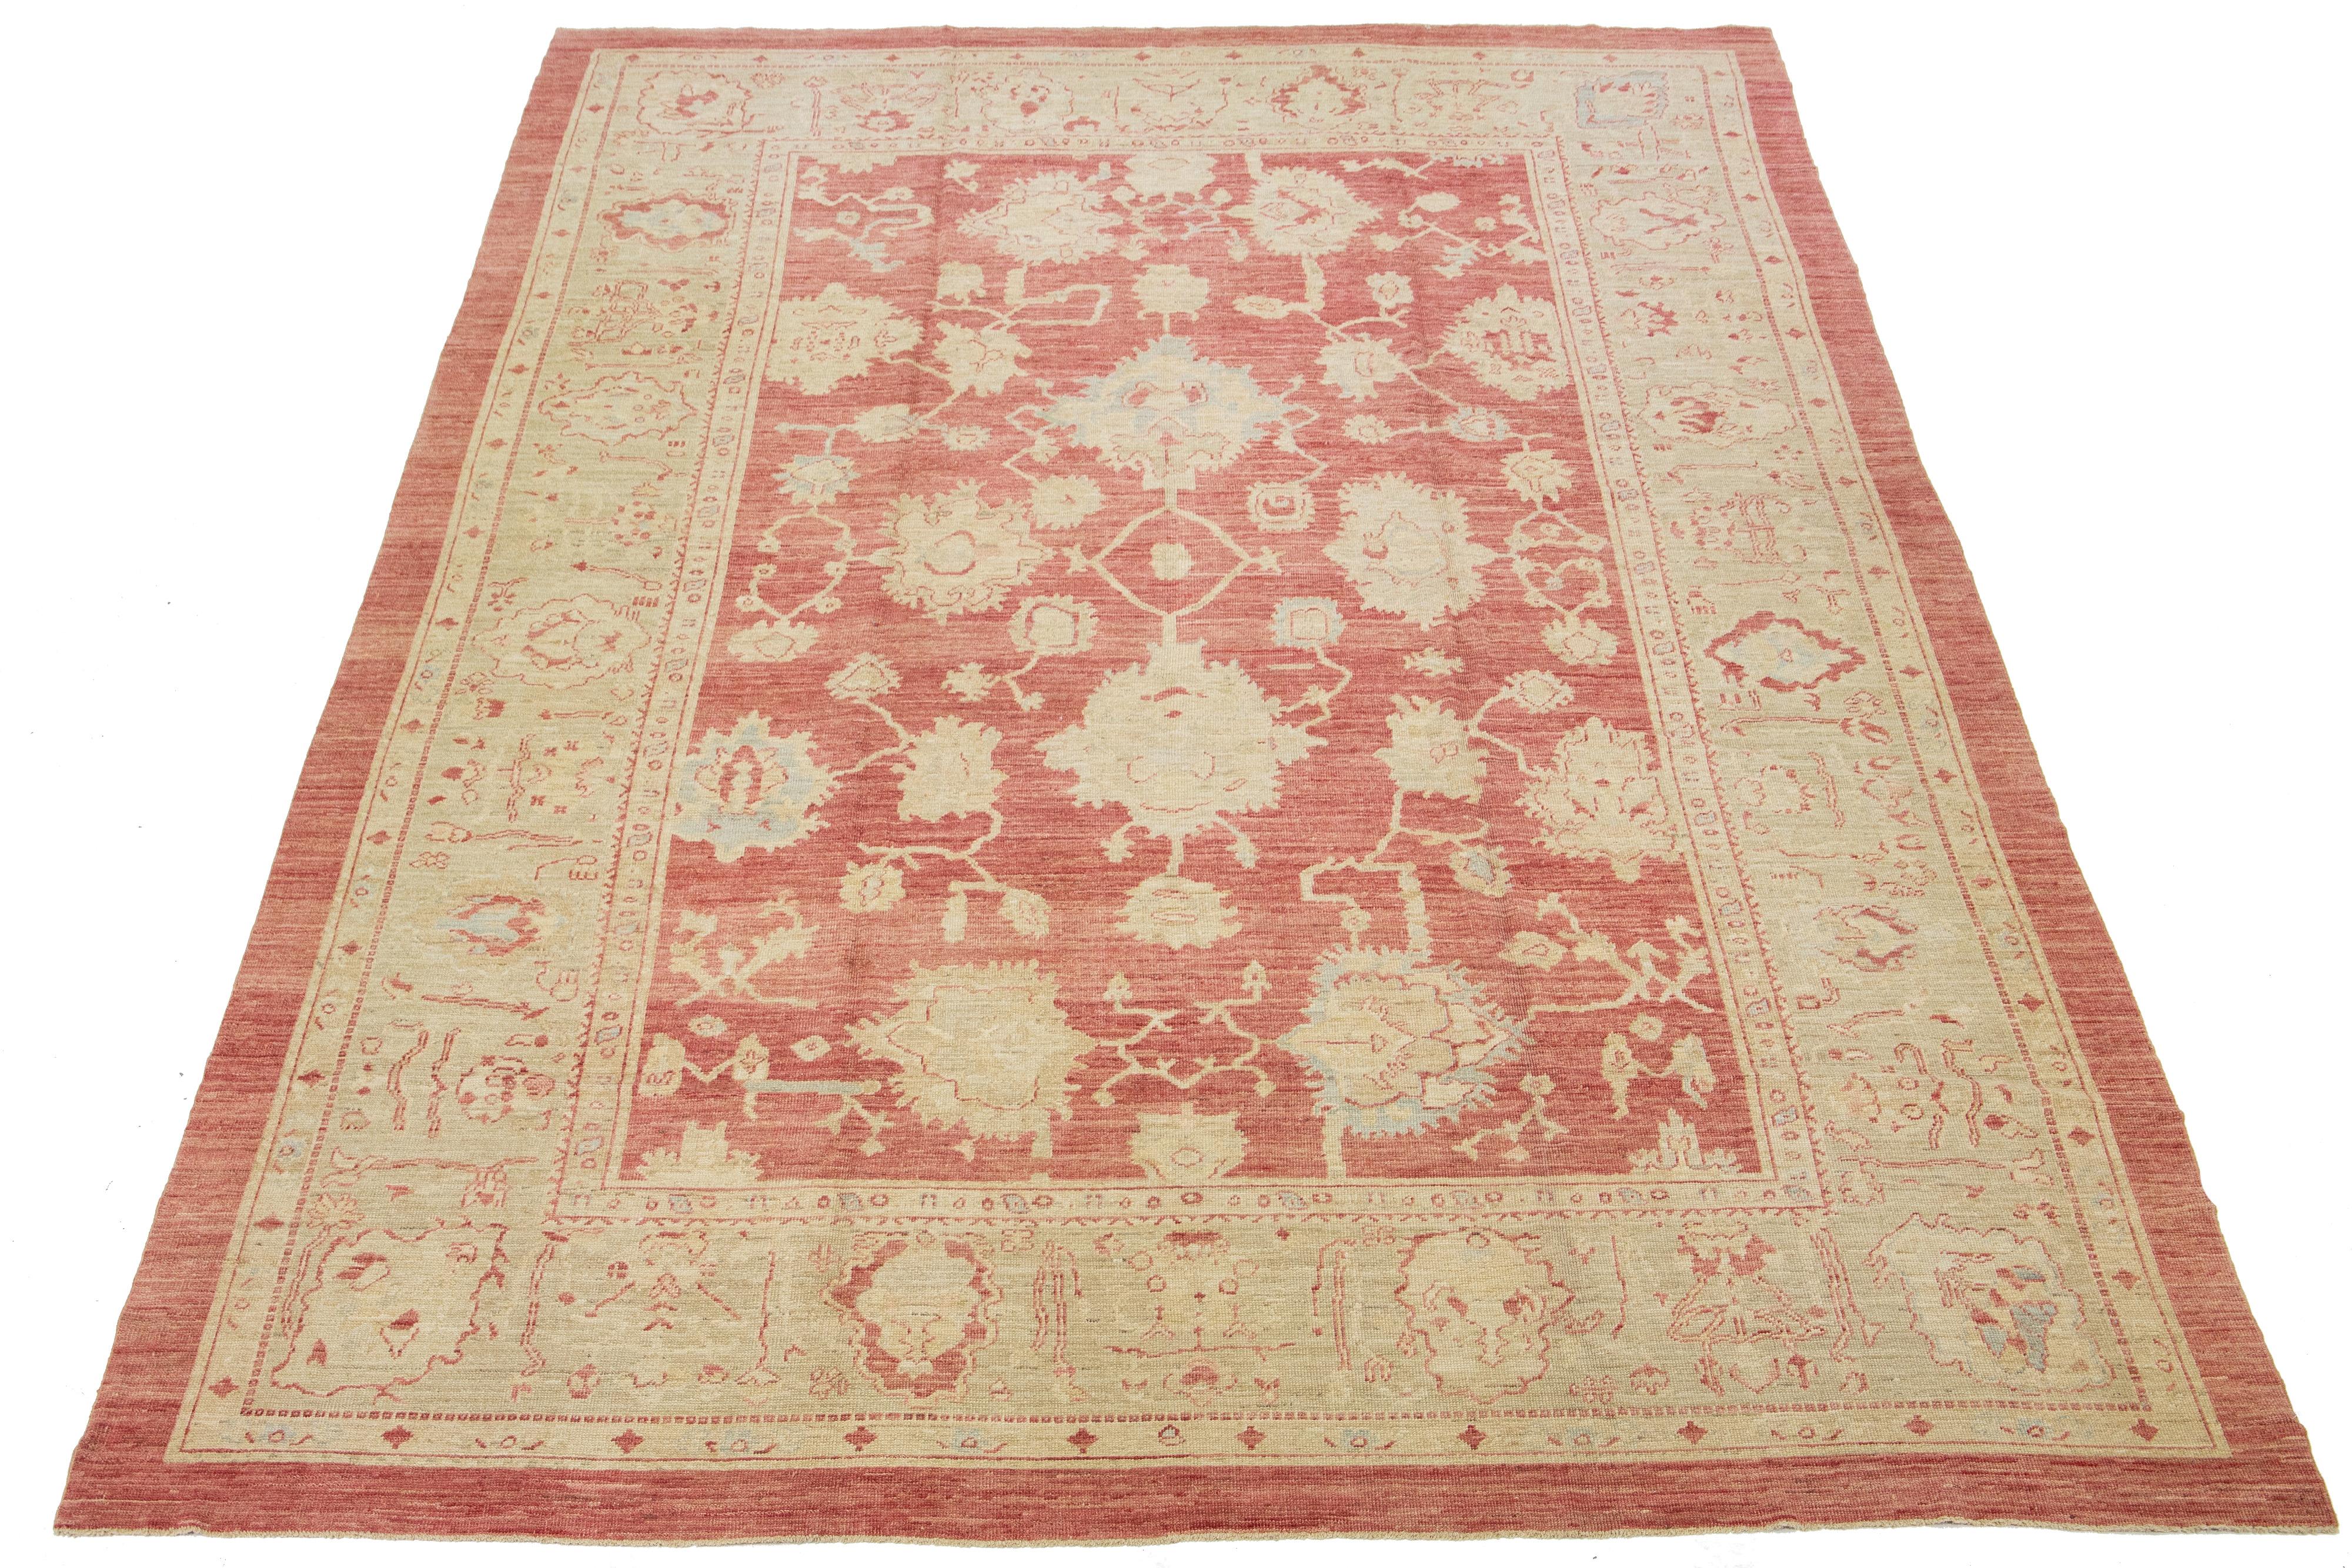 Beautiful Modern Turkish hand-knotted wool rug with a red field. This rug has a designed blue frame with multicolor accents in a gorgeous large-scale floral pattern.

This rug measures: 11'9